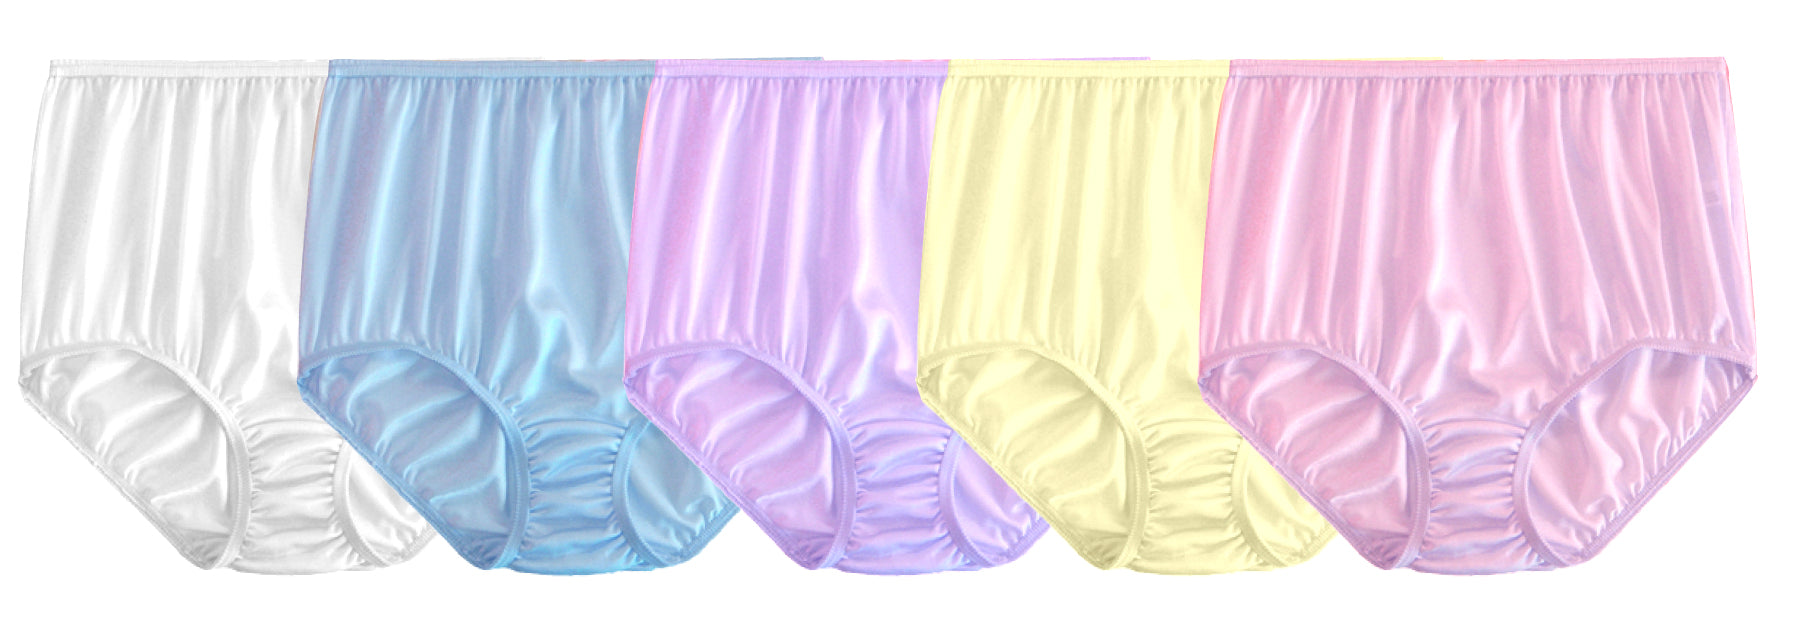 Teri Classic Nylon Full Coverage Panty Assorted 4 Pack - Style H331P